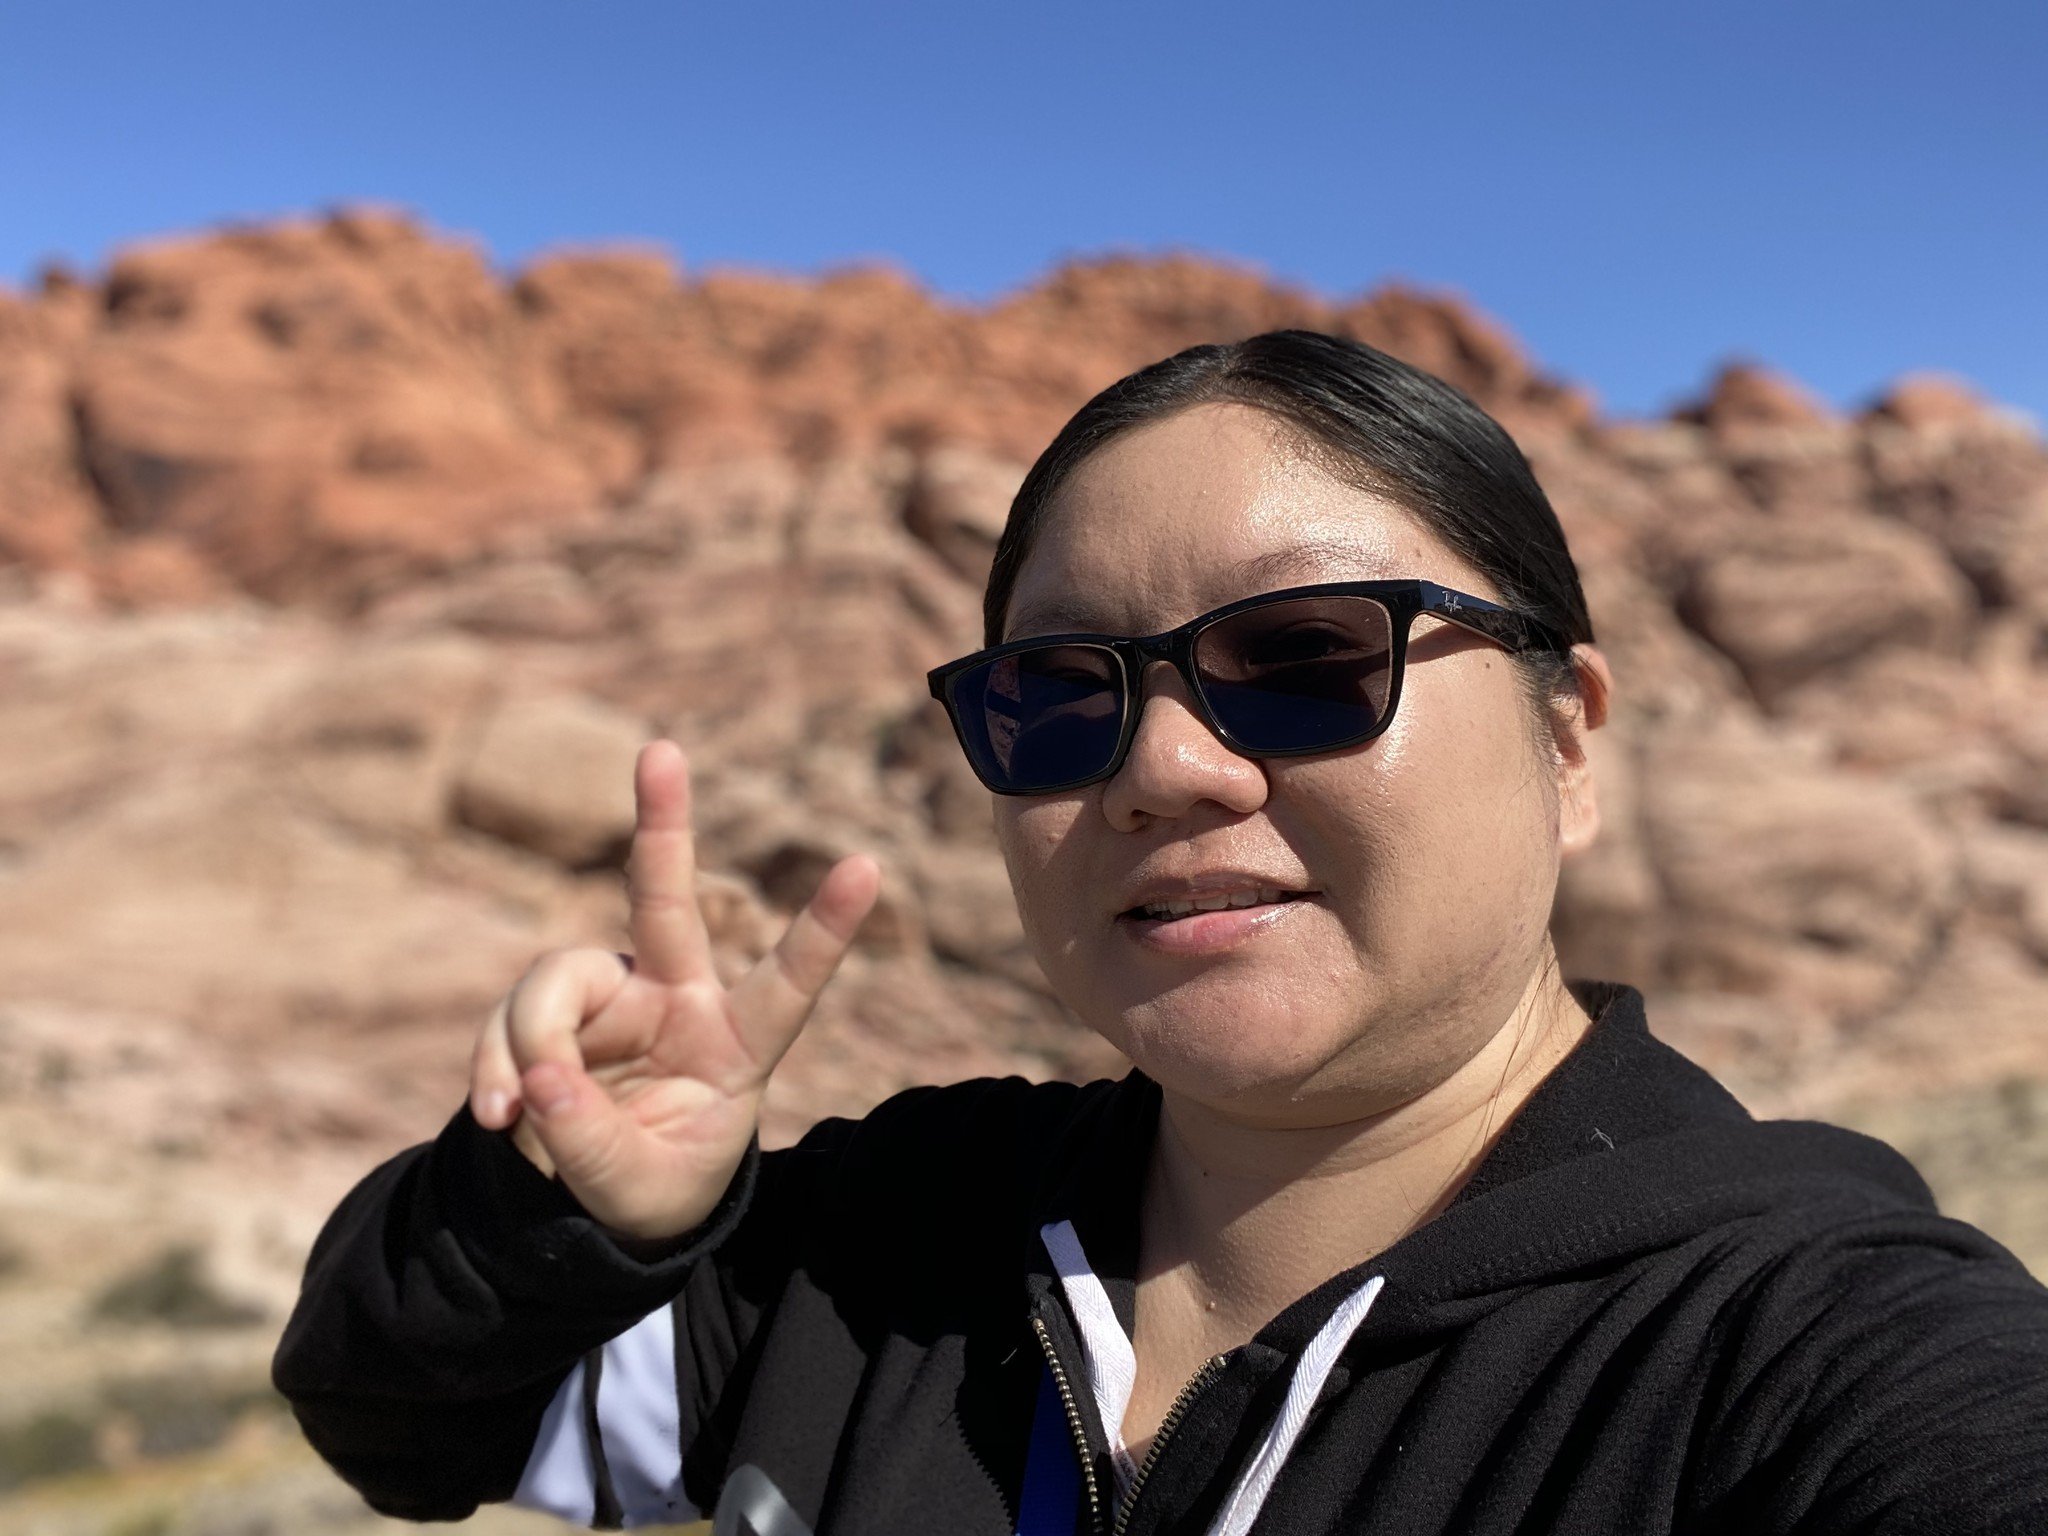 Christine takes a selfie at Red Rock Canyon in Nevada